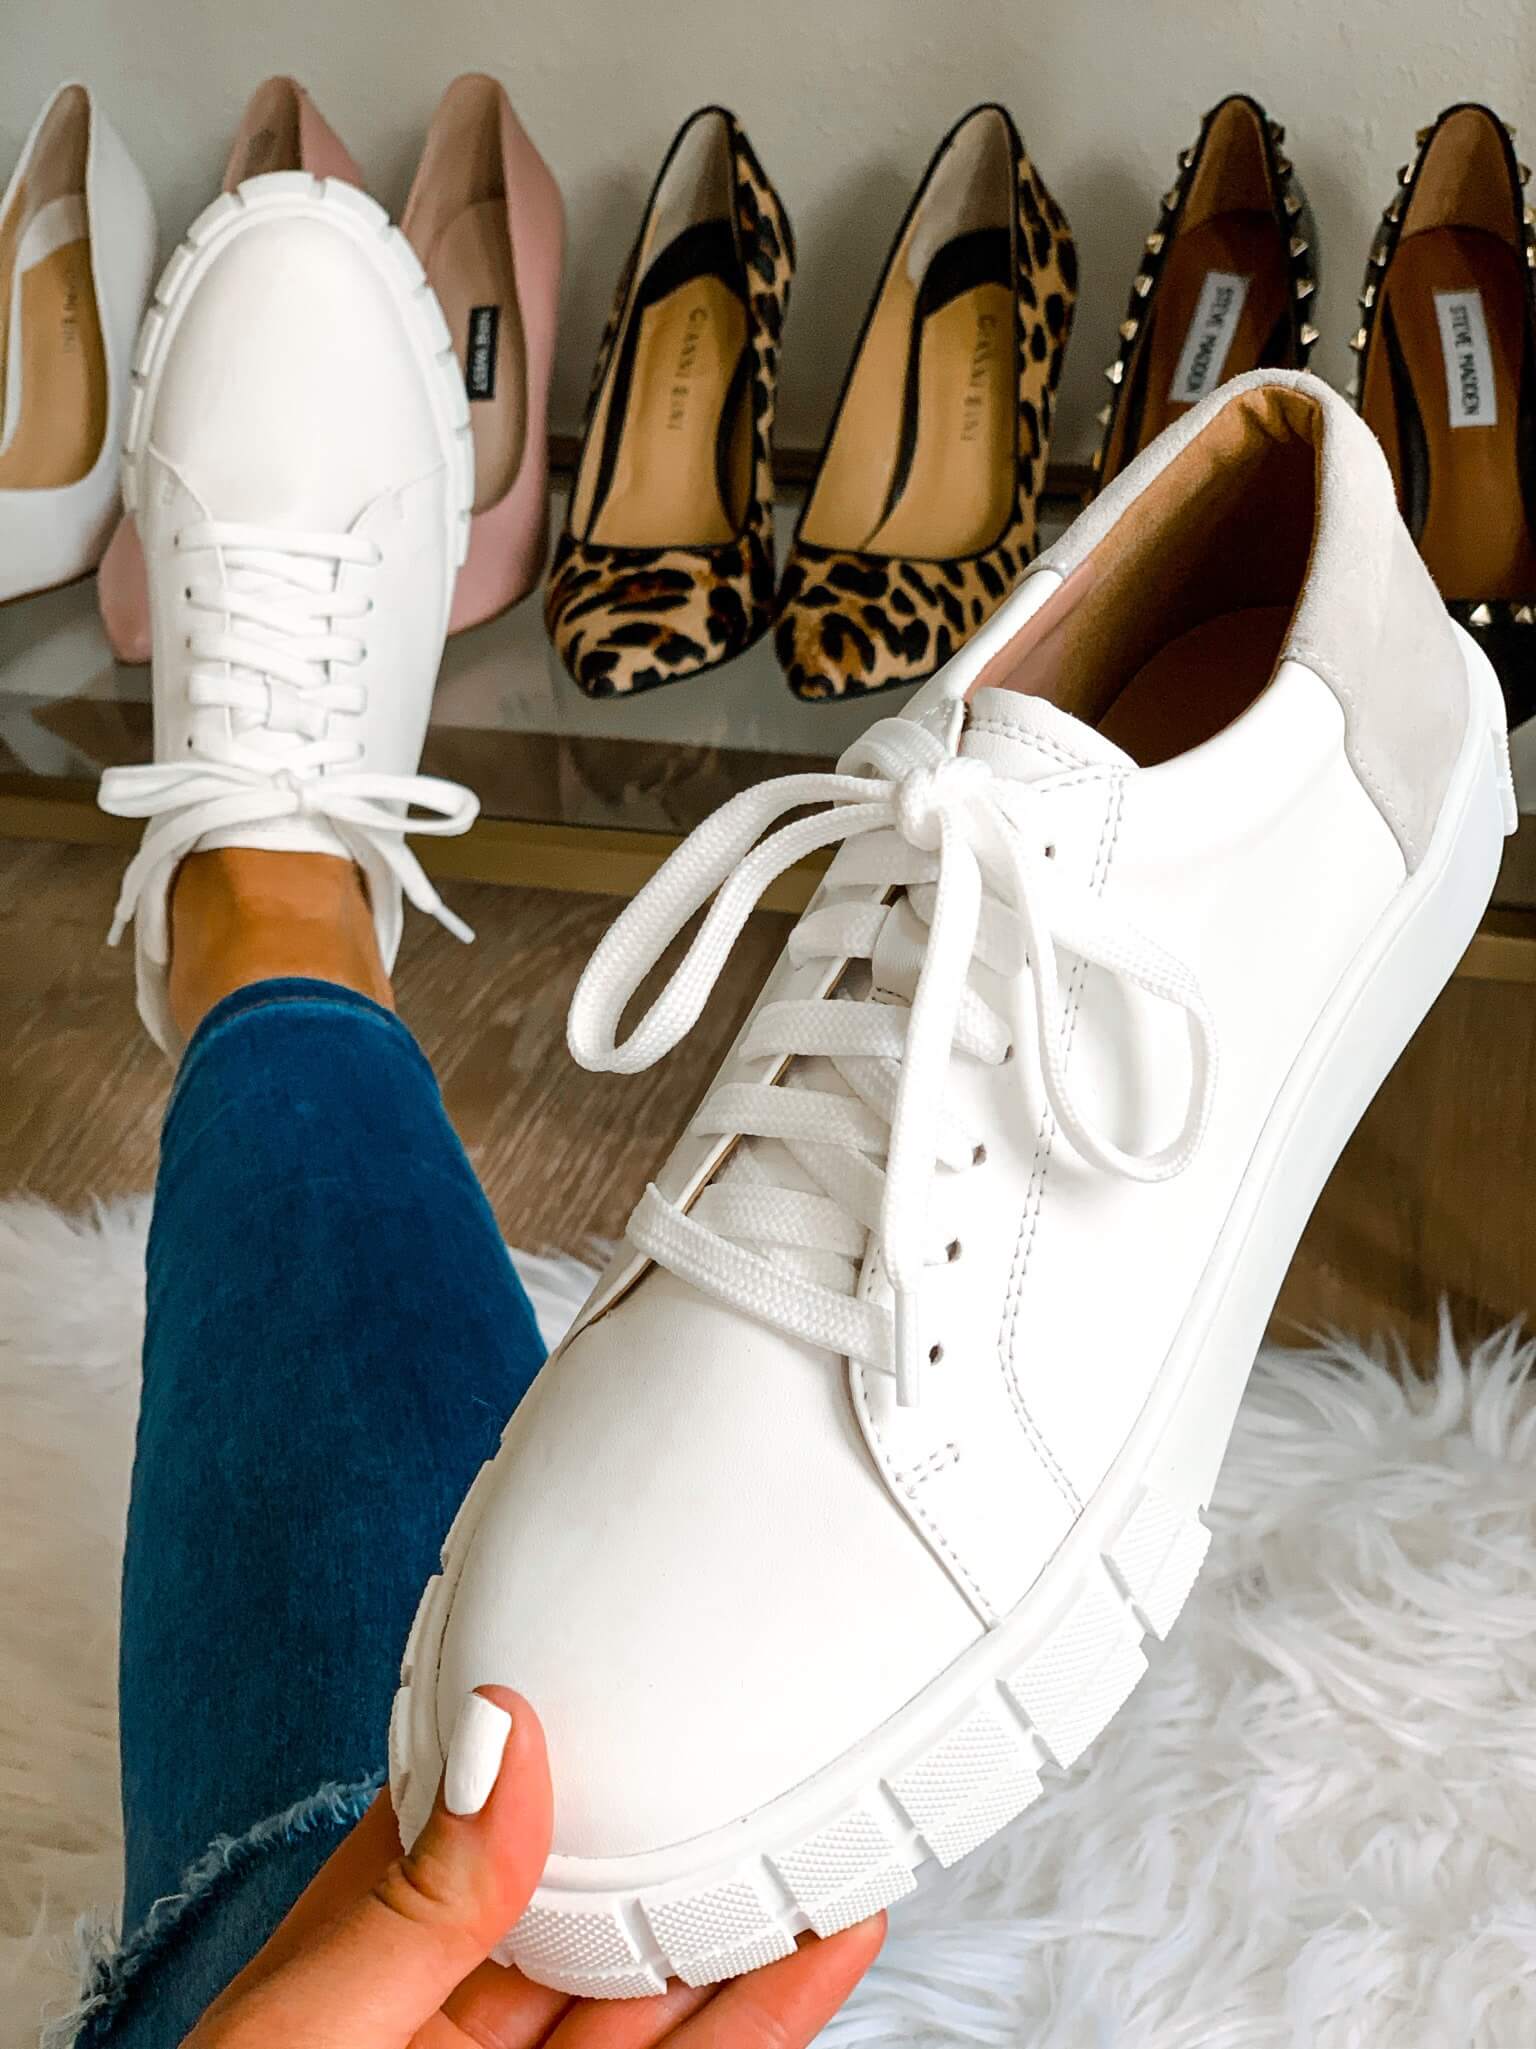 New Fall & Winter Shoe Try On + Giftcard Giveaway! - The Double Take Girls